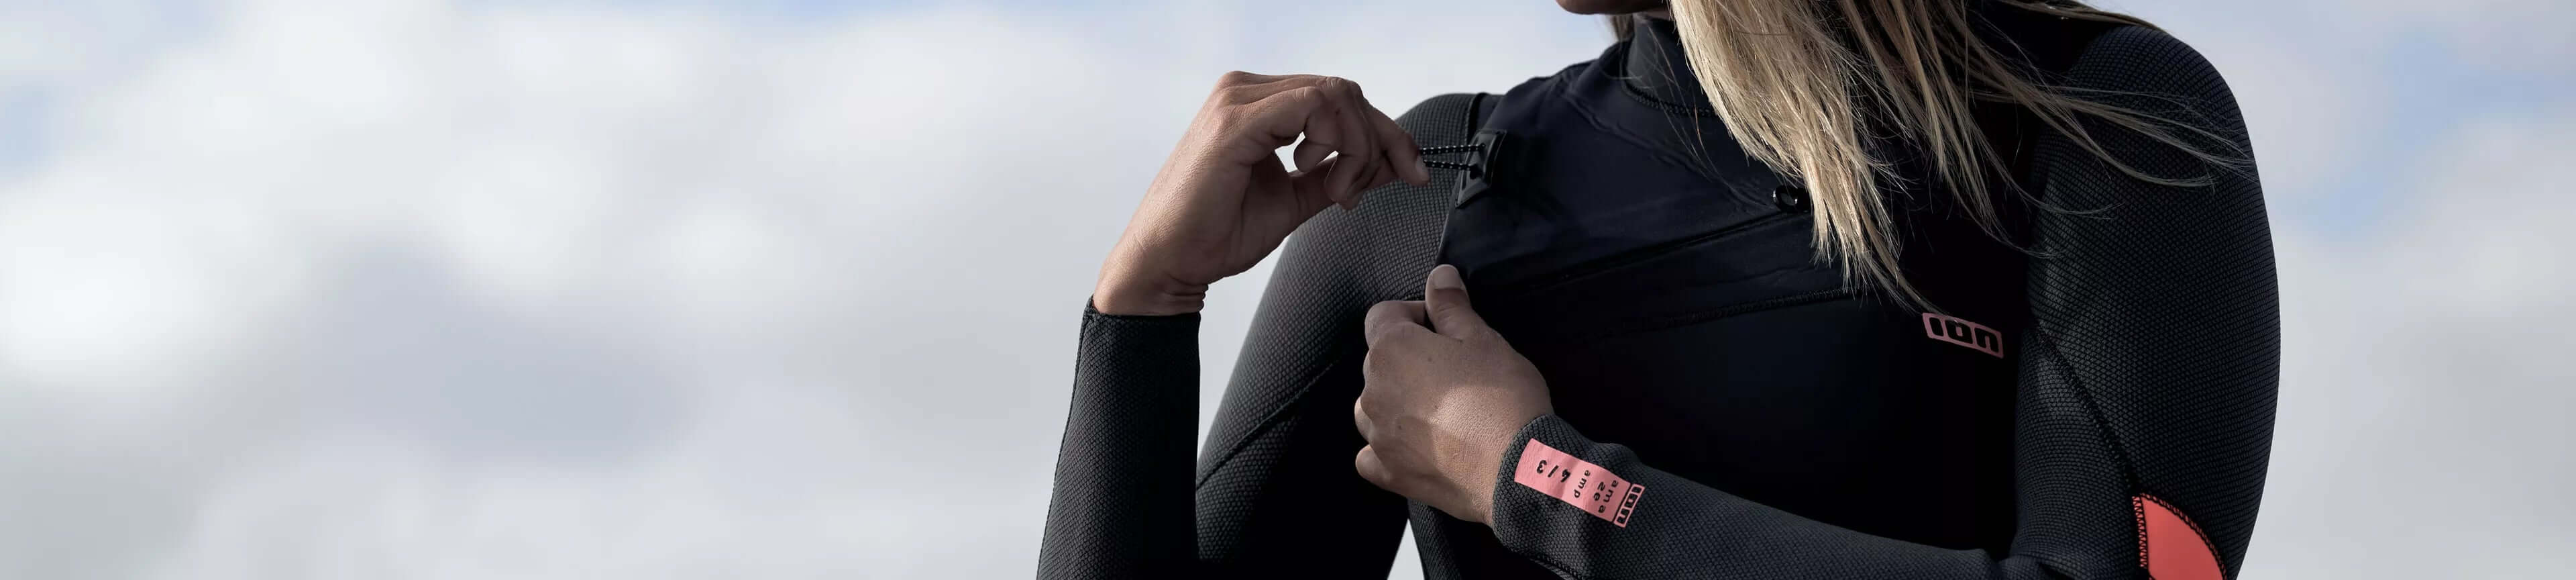 ION Wetsuits: